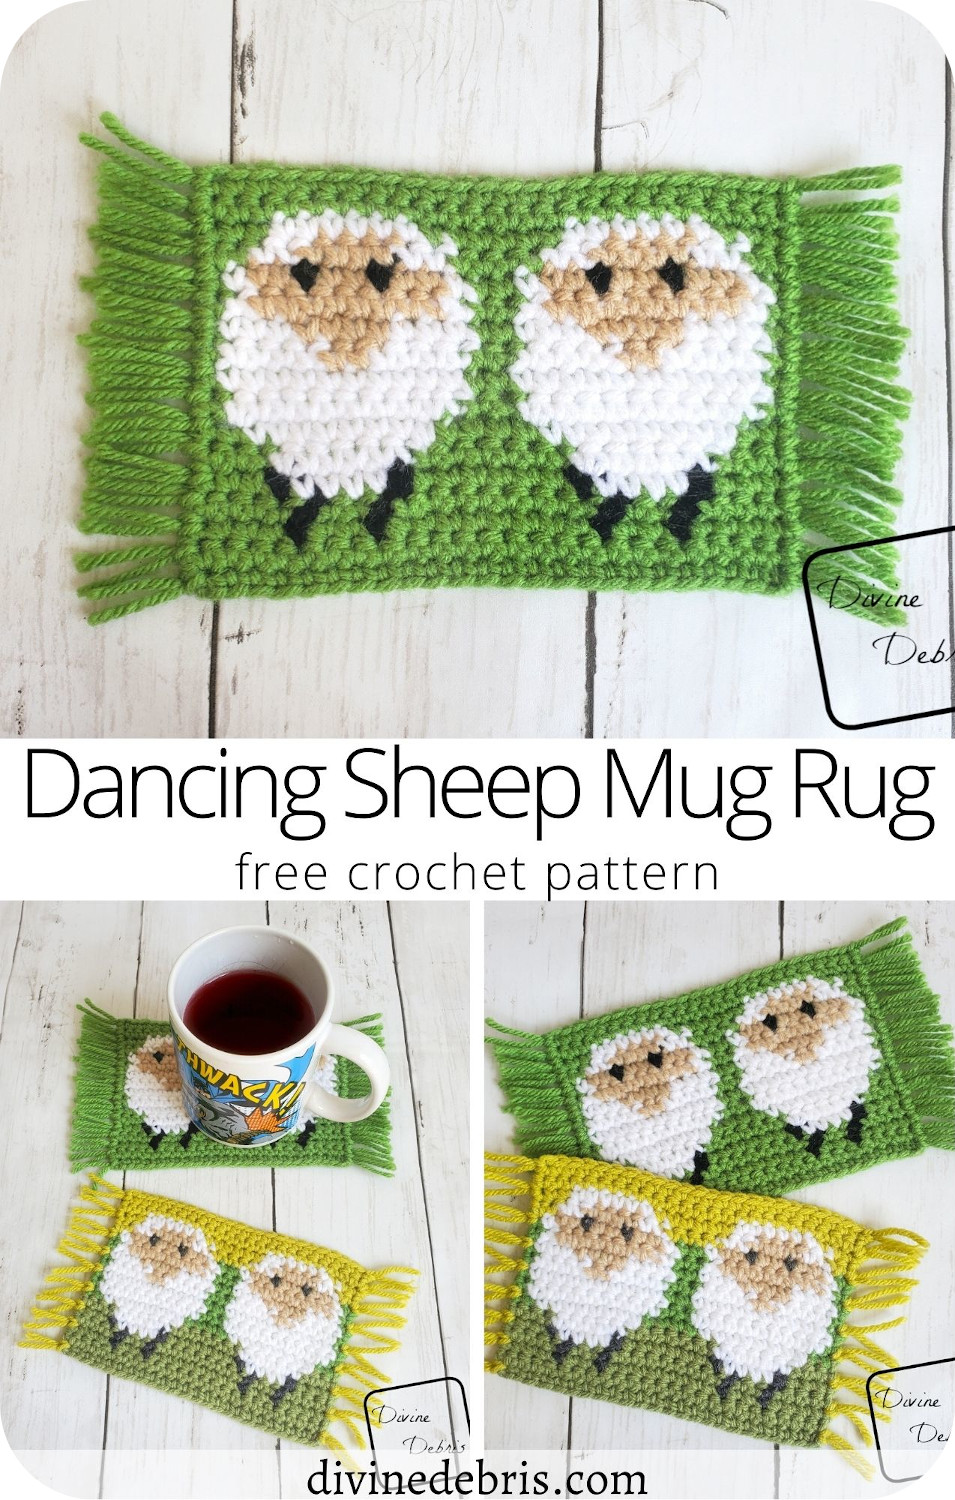 Learn to make the Dancing Sheep Mug Rug, a fun tapestry crochet home decor piece, from a free crochet pattern on DivineDebris.com